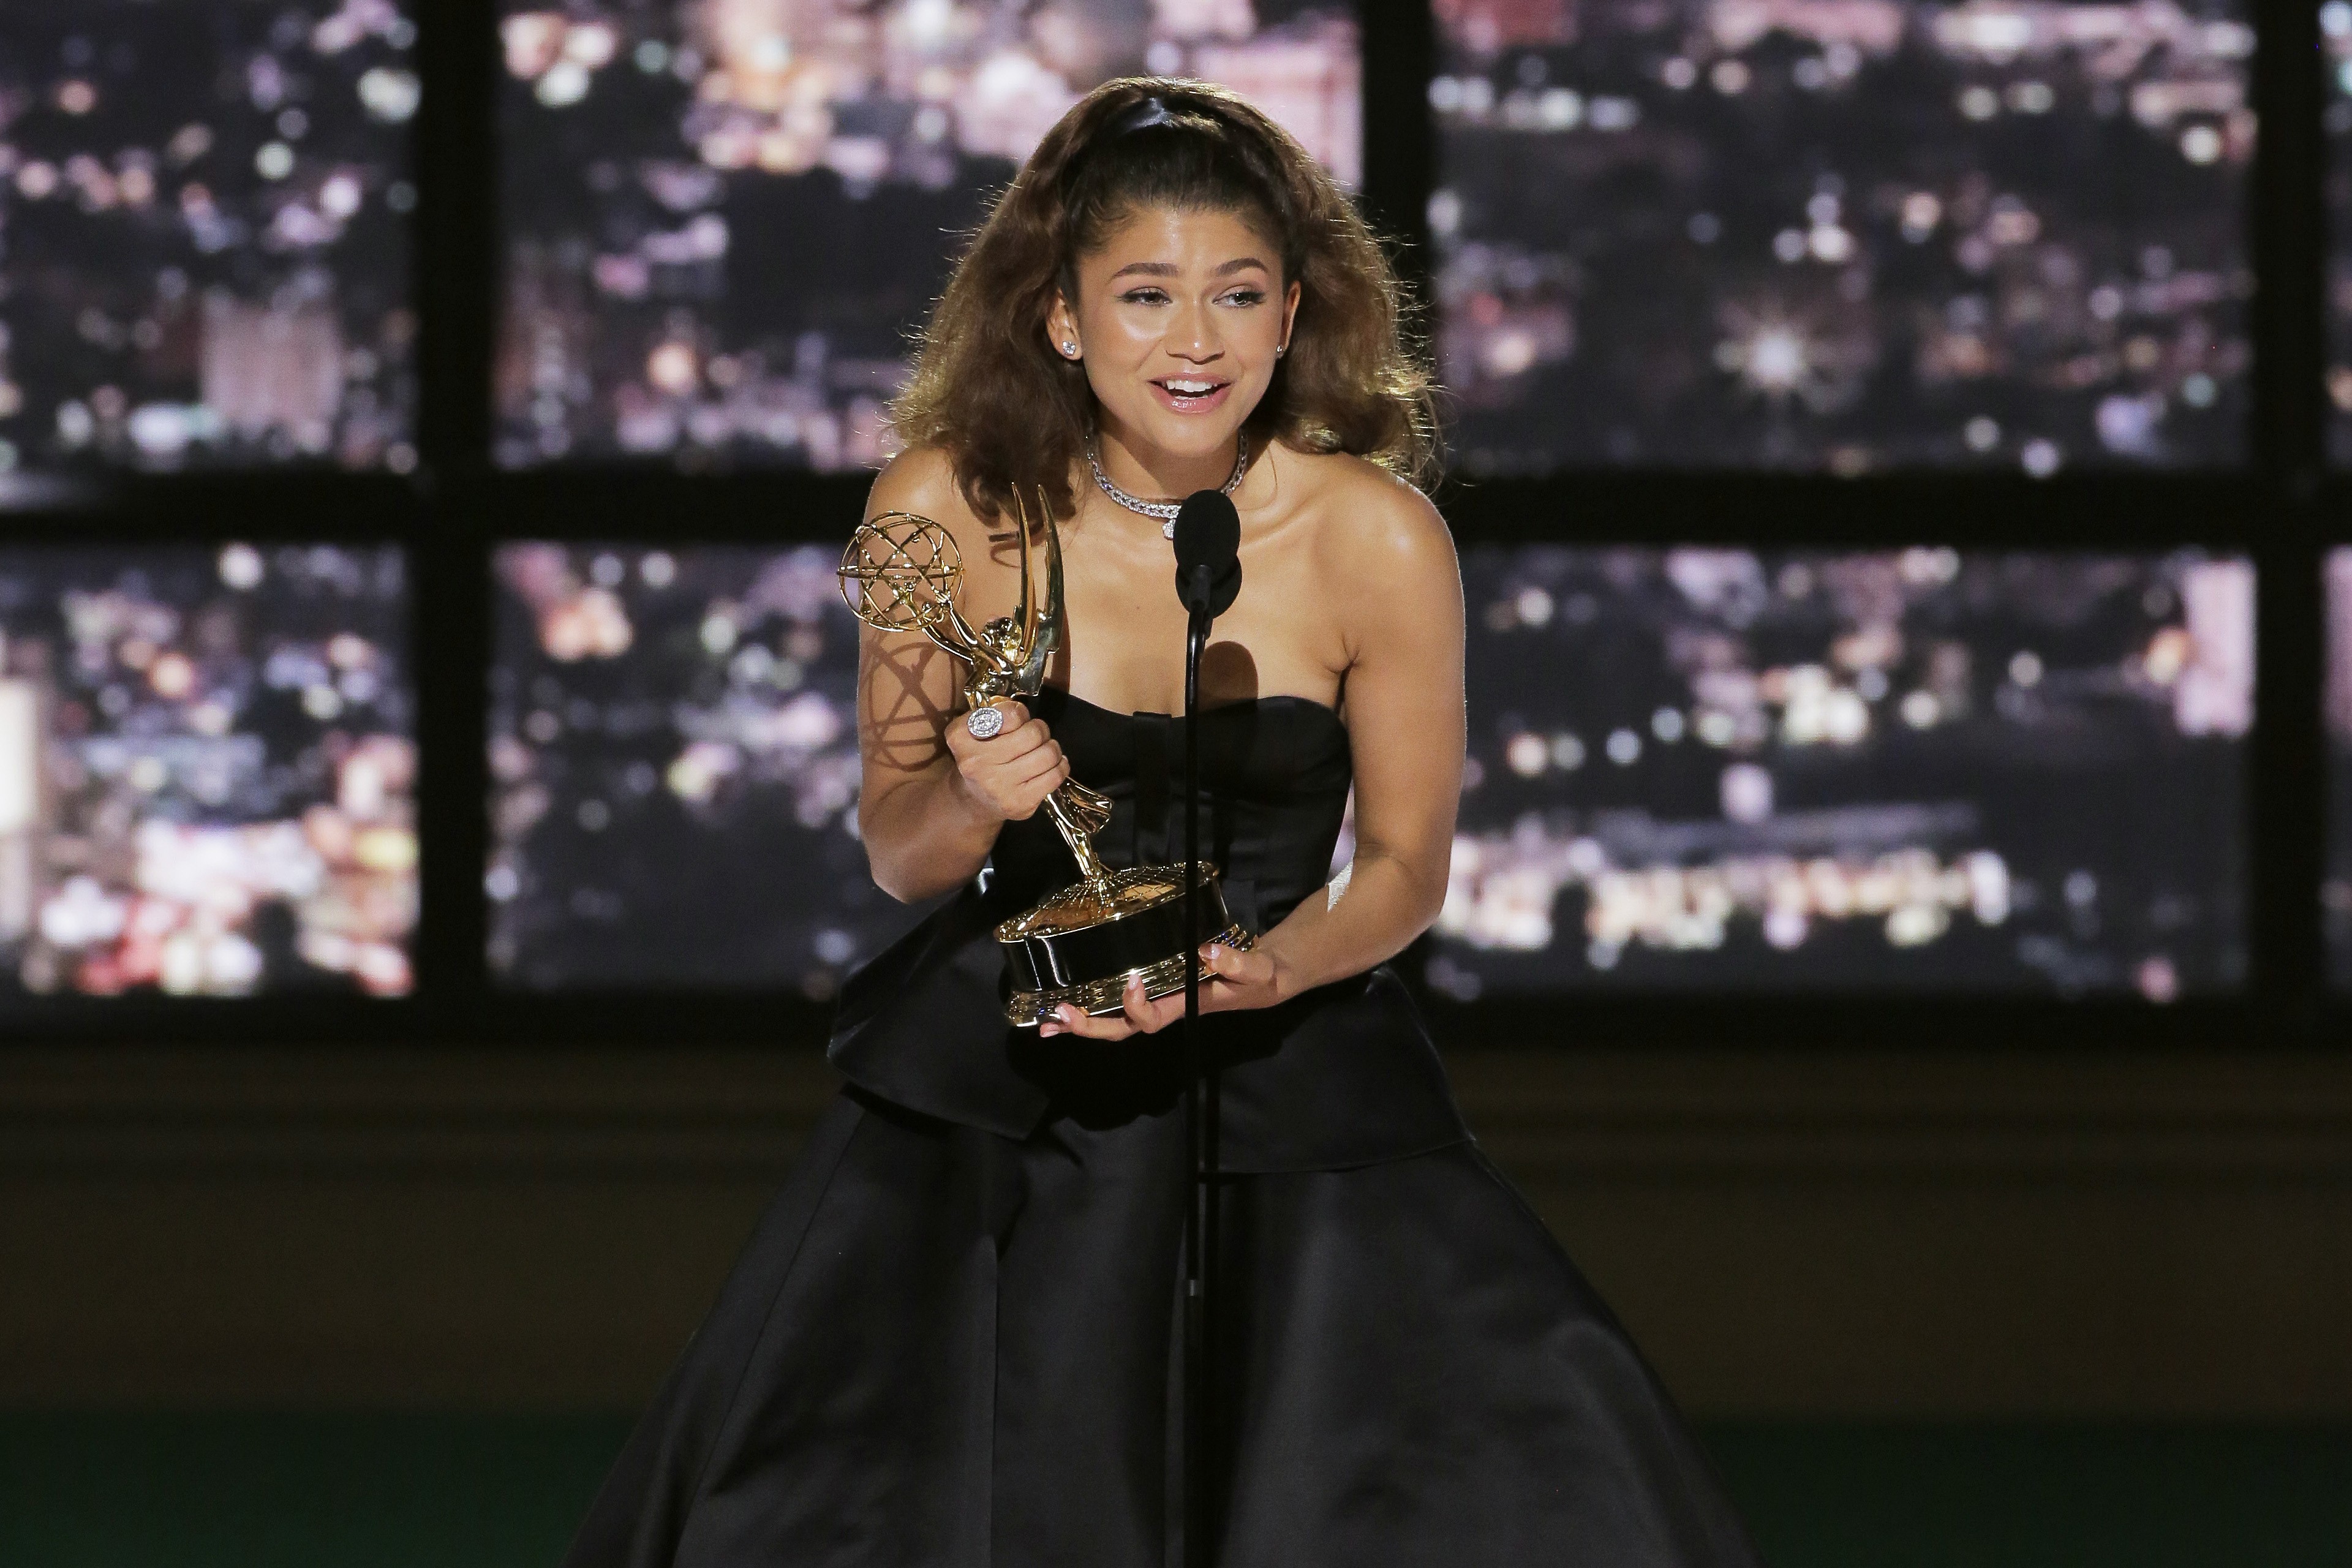 LOS ANGELES, CALIFORNIA - SEPTEMBER 12: 74th ANNUAL PRIMETIME EMMY AWARDS -- Pictured: Zendaya accepts the Outstanding Lead Actress in a Drama Series award for "euphoria" on stage during the 74th Annual Primetime Emmy Awards held at the Microsoft Theater (Photo: NBC via Getty Images)